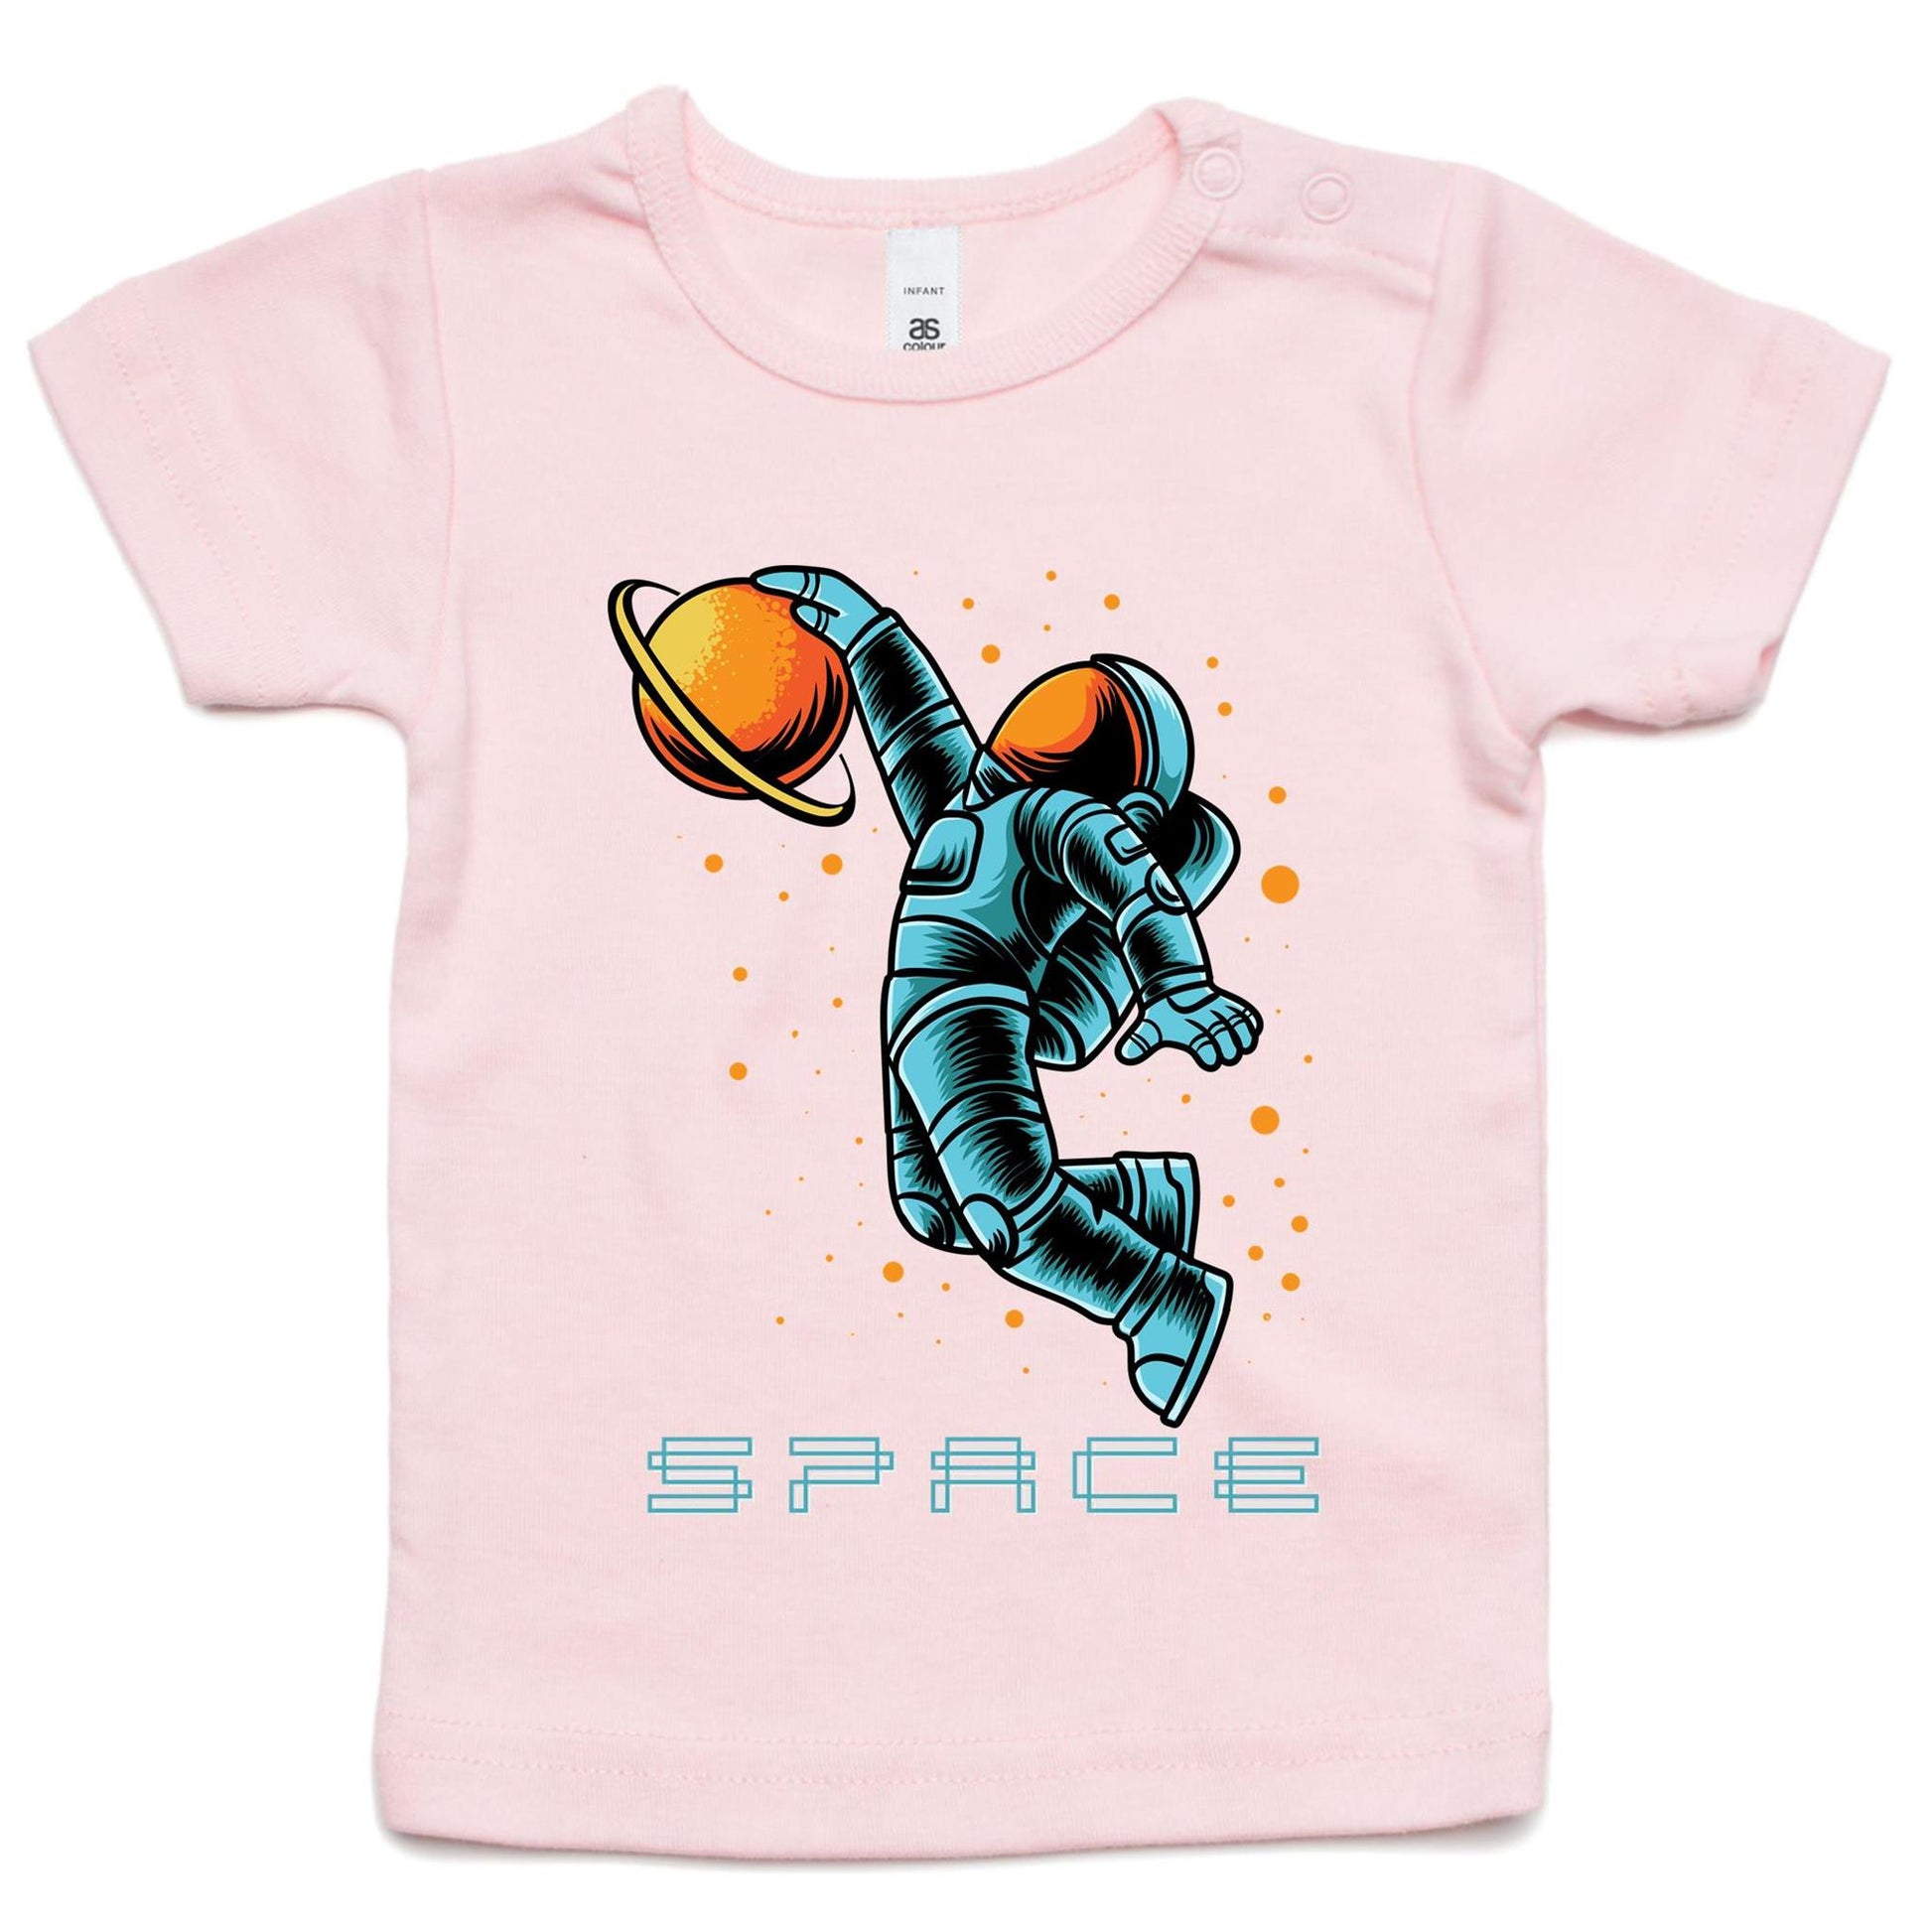 Astronaut Basketball - Baby T-shirt Pink Space